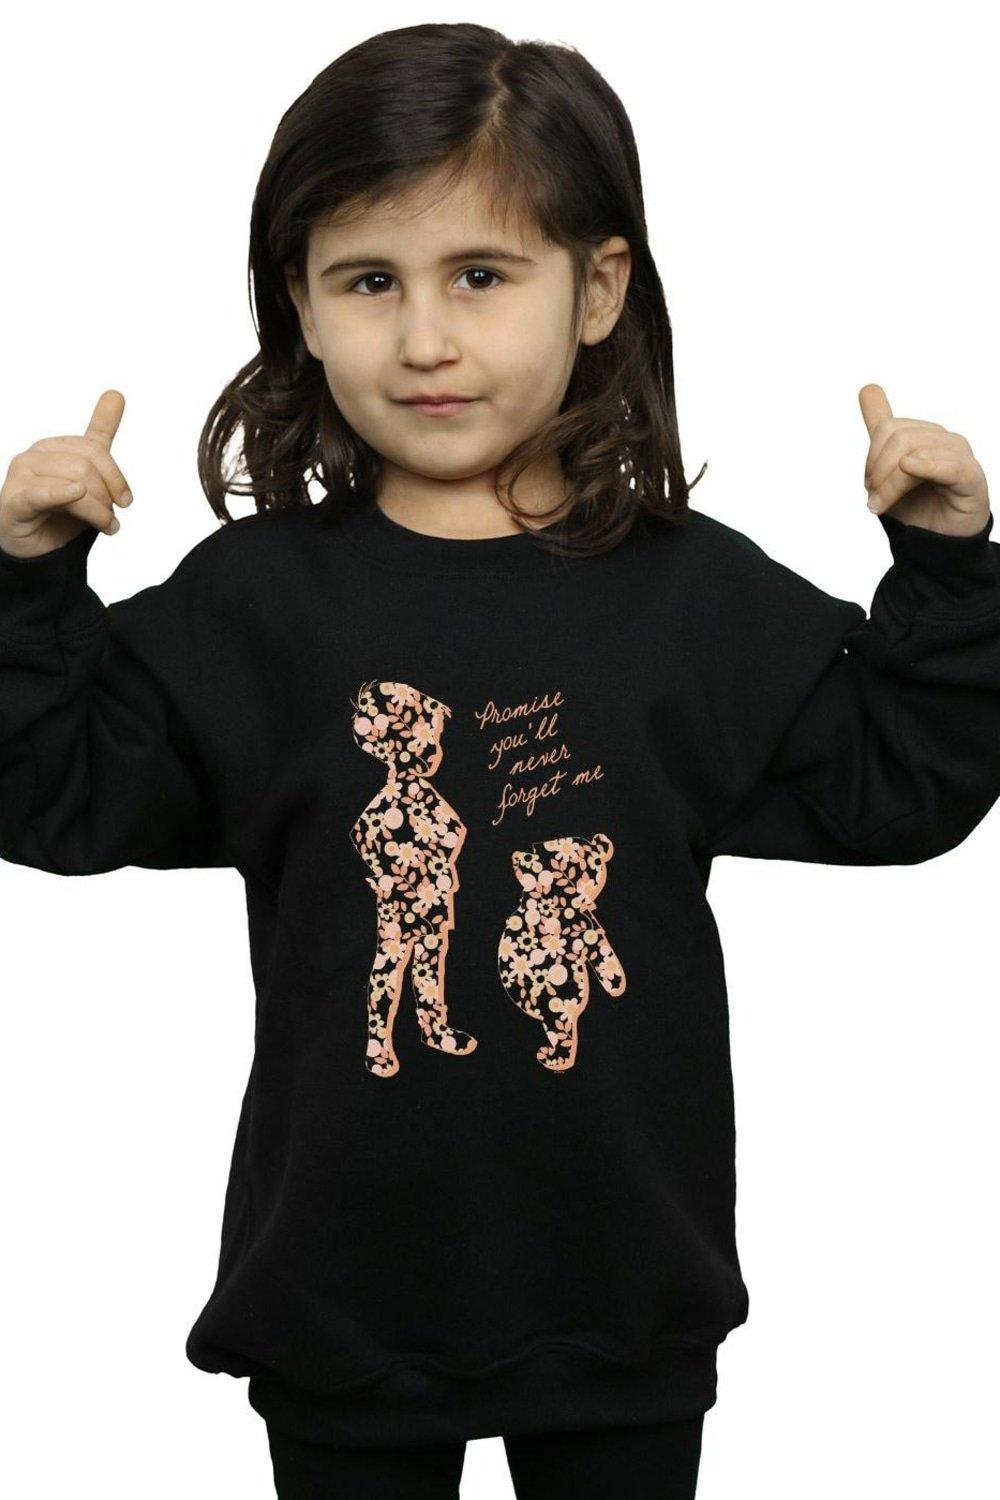 Winnie The Pooh Promise You’ll Never Forget Sweatshirt